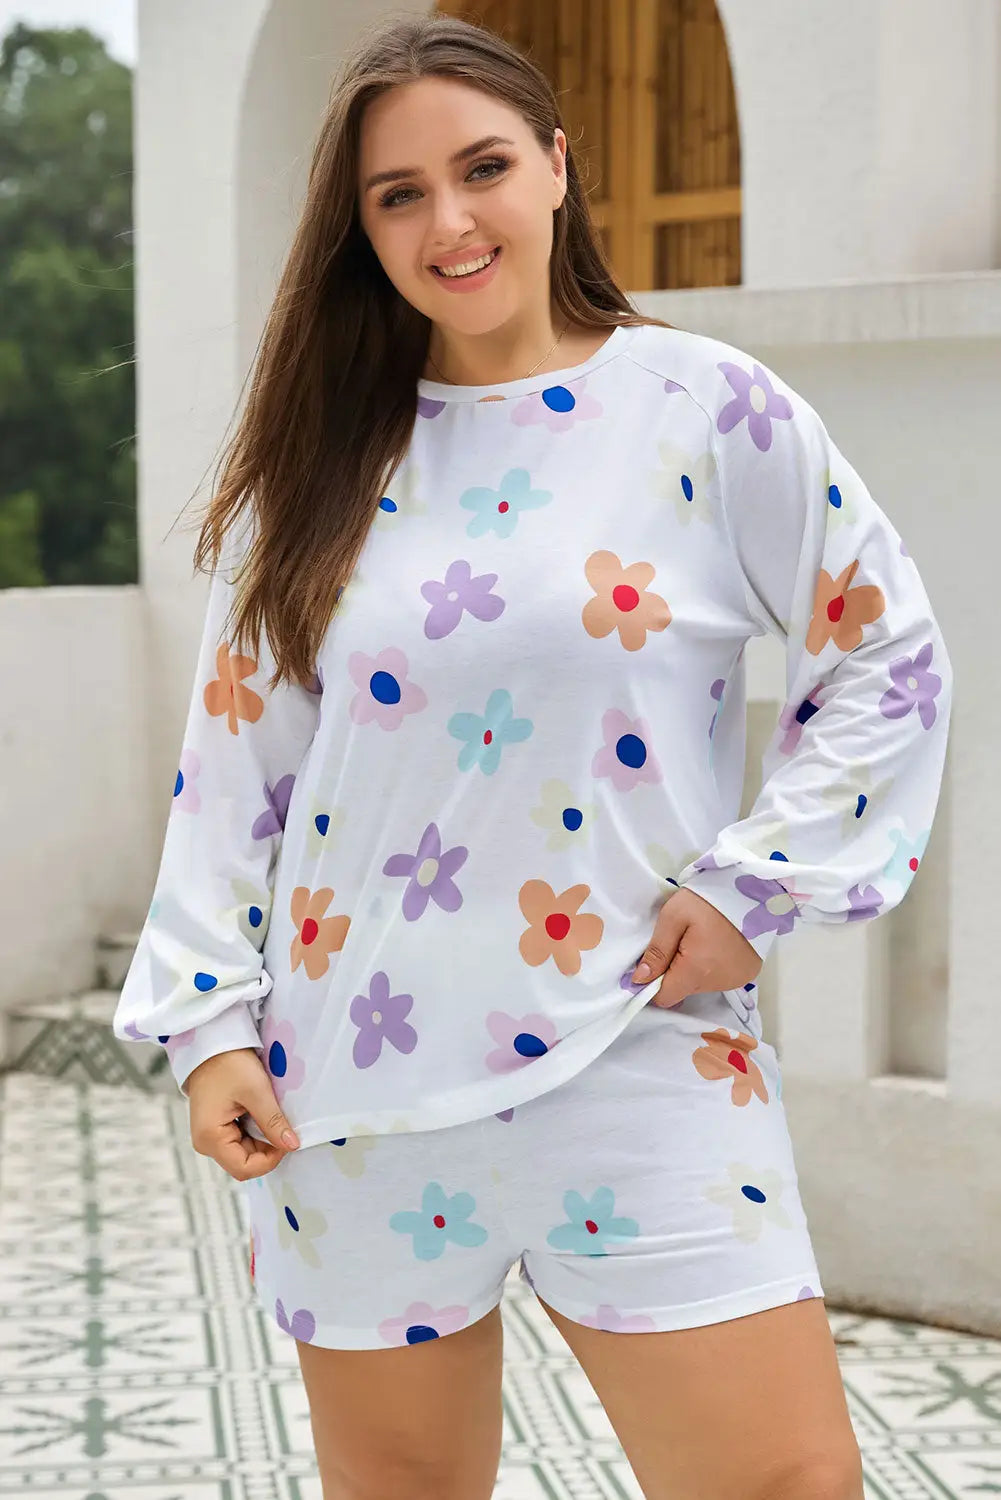 White plus size flower print raglan pullover and shorts outfit - 1x / 95% polyester + 5% elastane